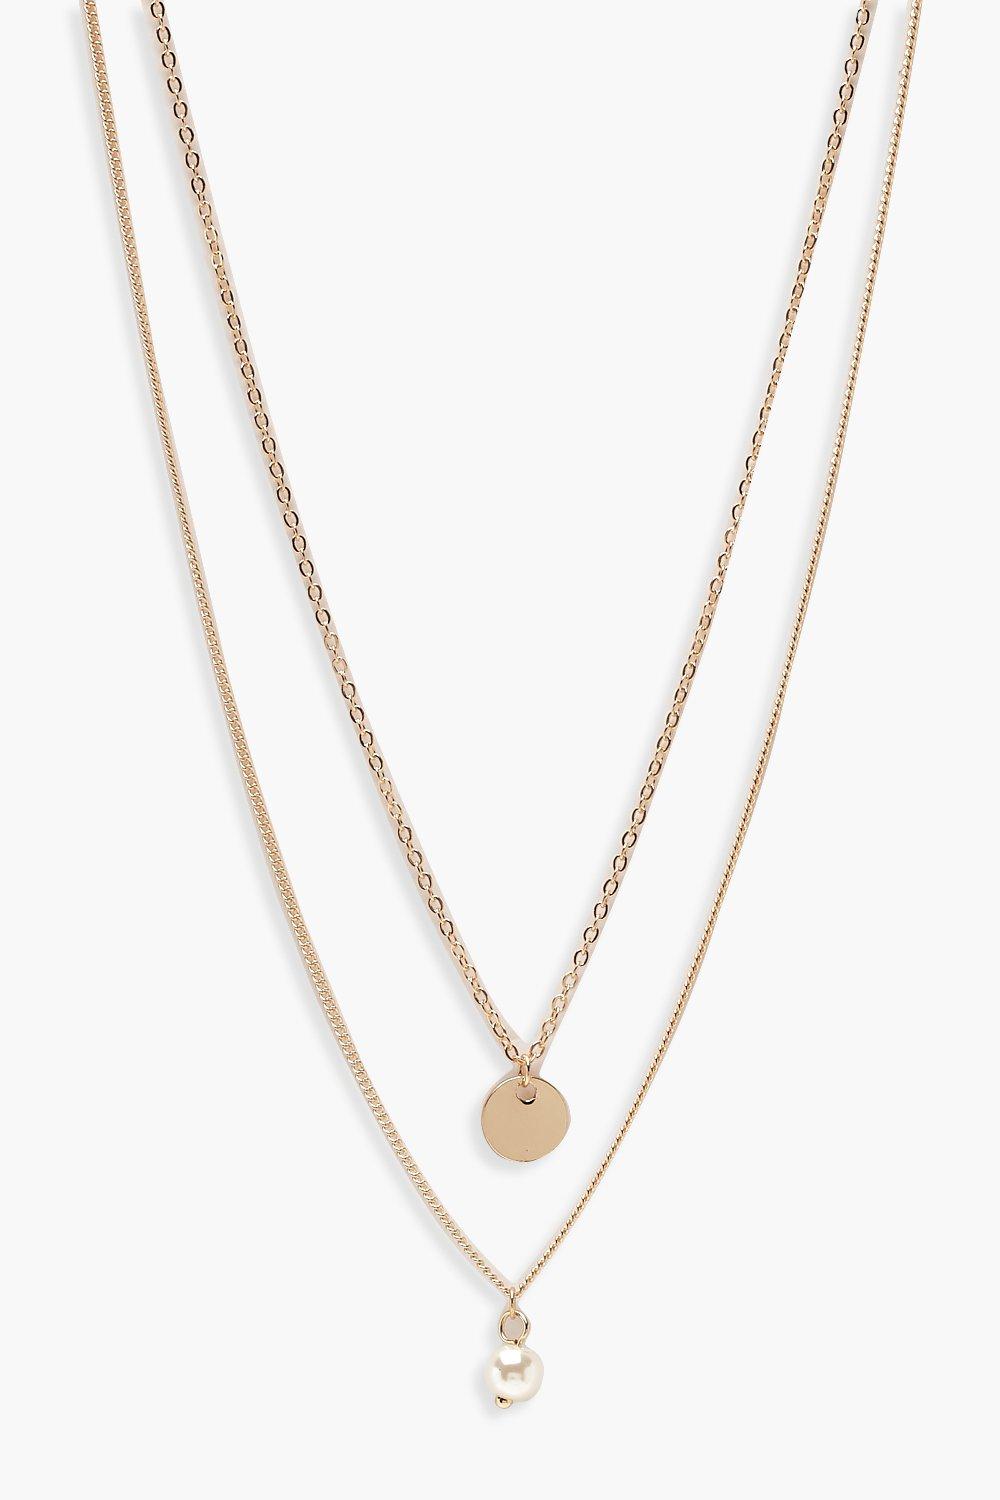 Boohoo Angel Detail Necklace in Gold Womens Necklaces Boohoo Necklaces Metallic - Save 17% 